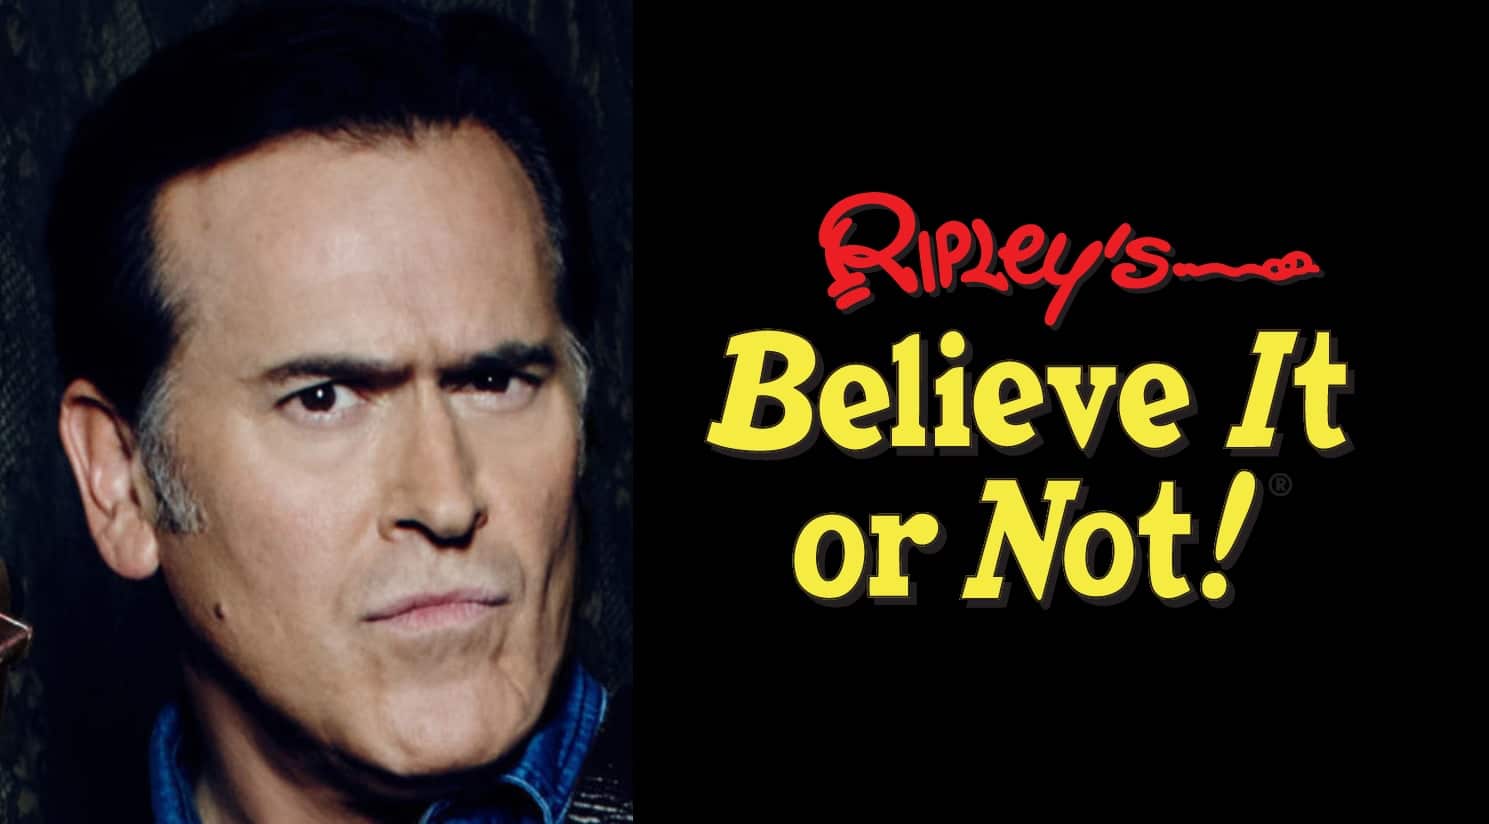 Bruce Campbell Is Coming With ‘Ripley’s Believe It or Not!’